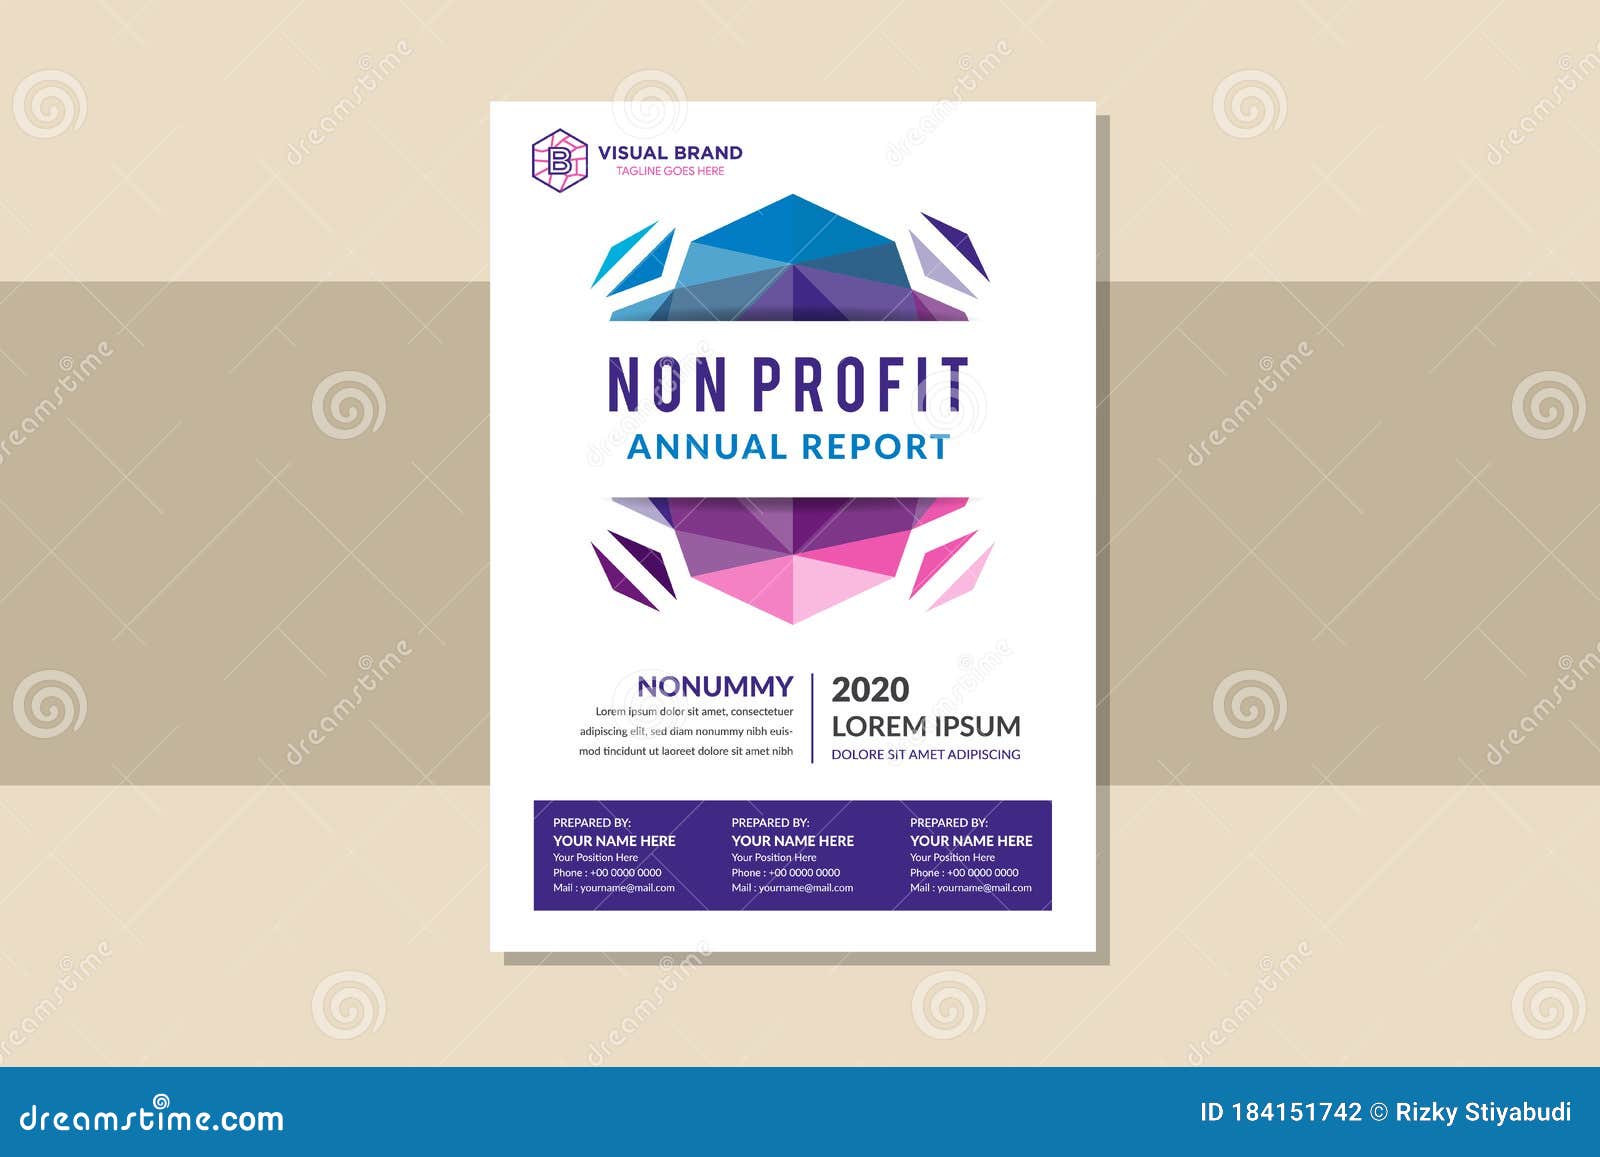 Free Annual Report Template Non Profit from thumbs.dreamstime.com